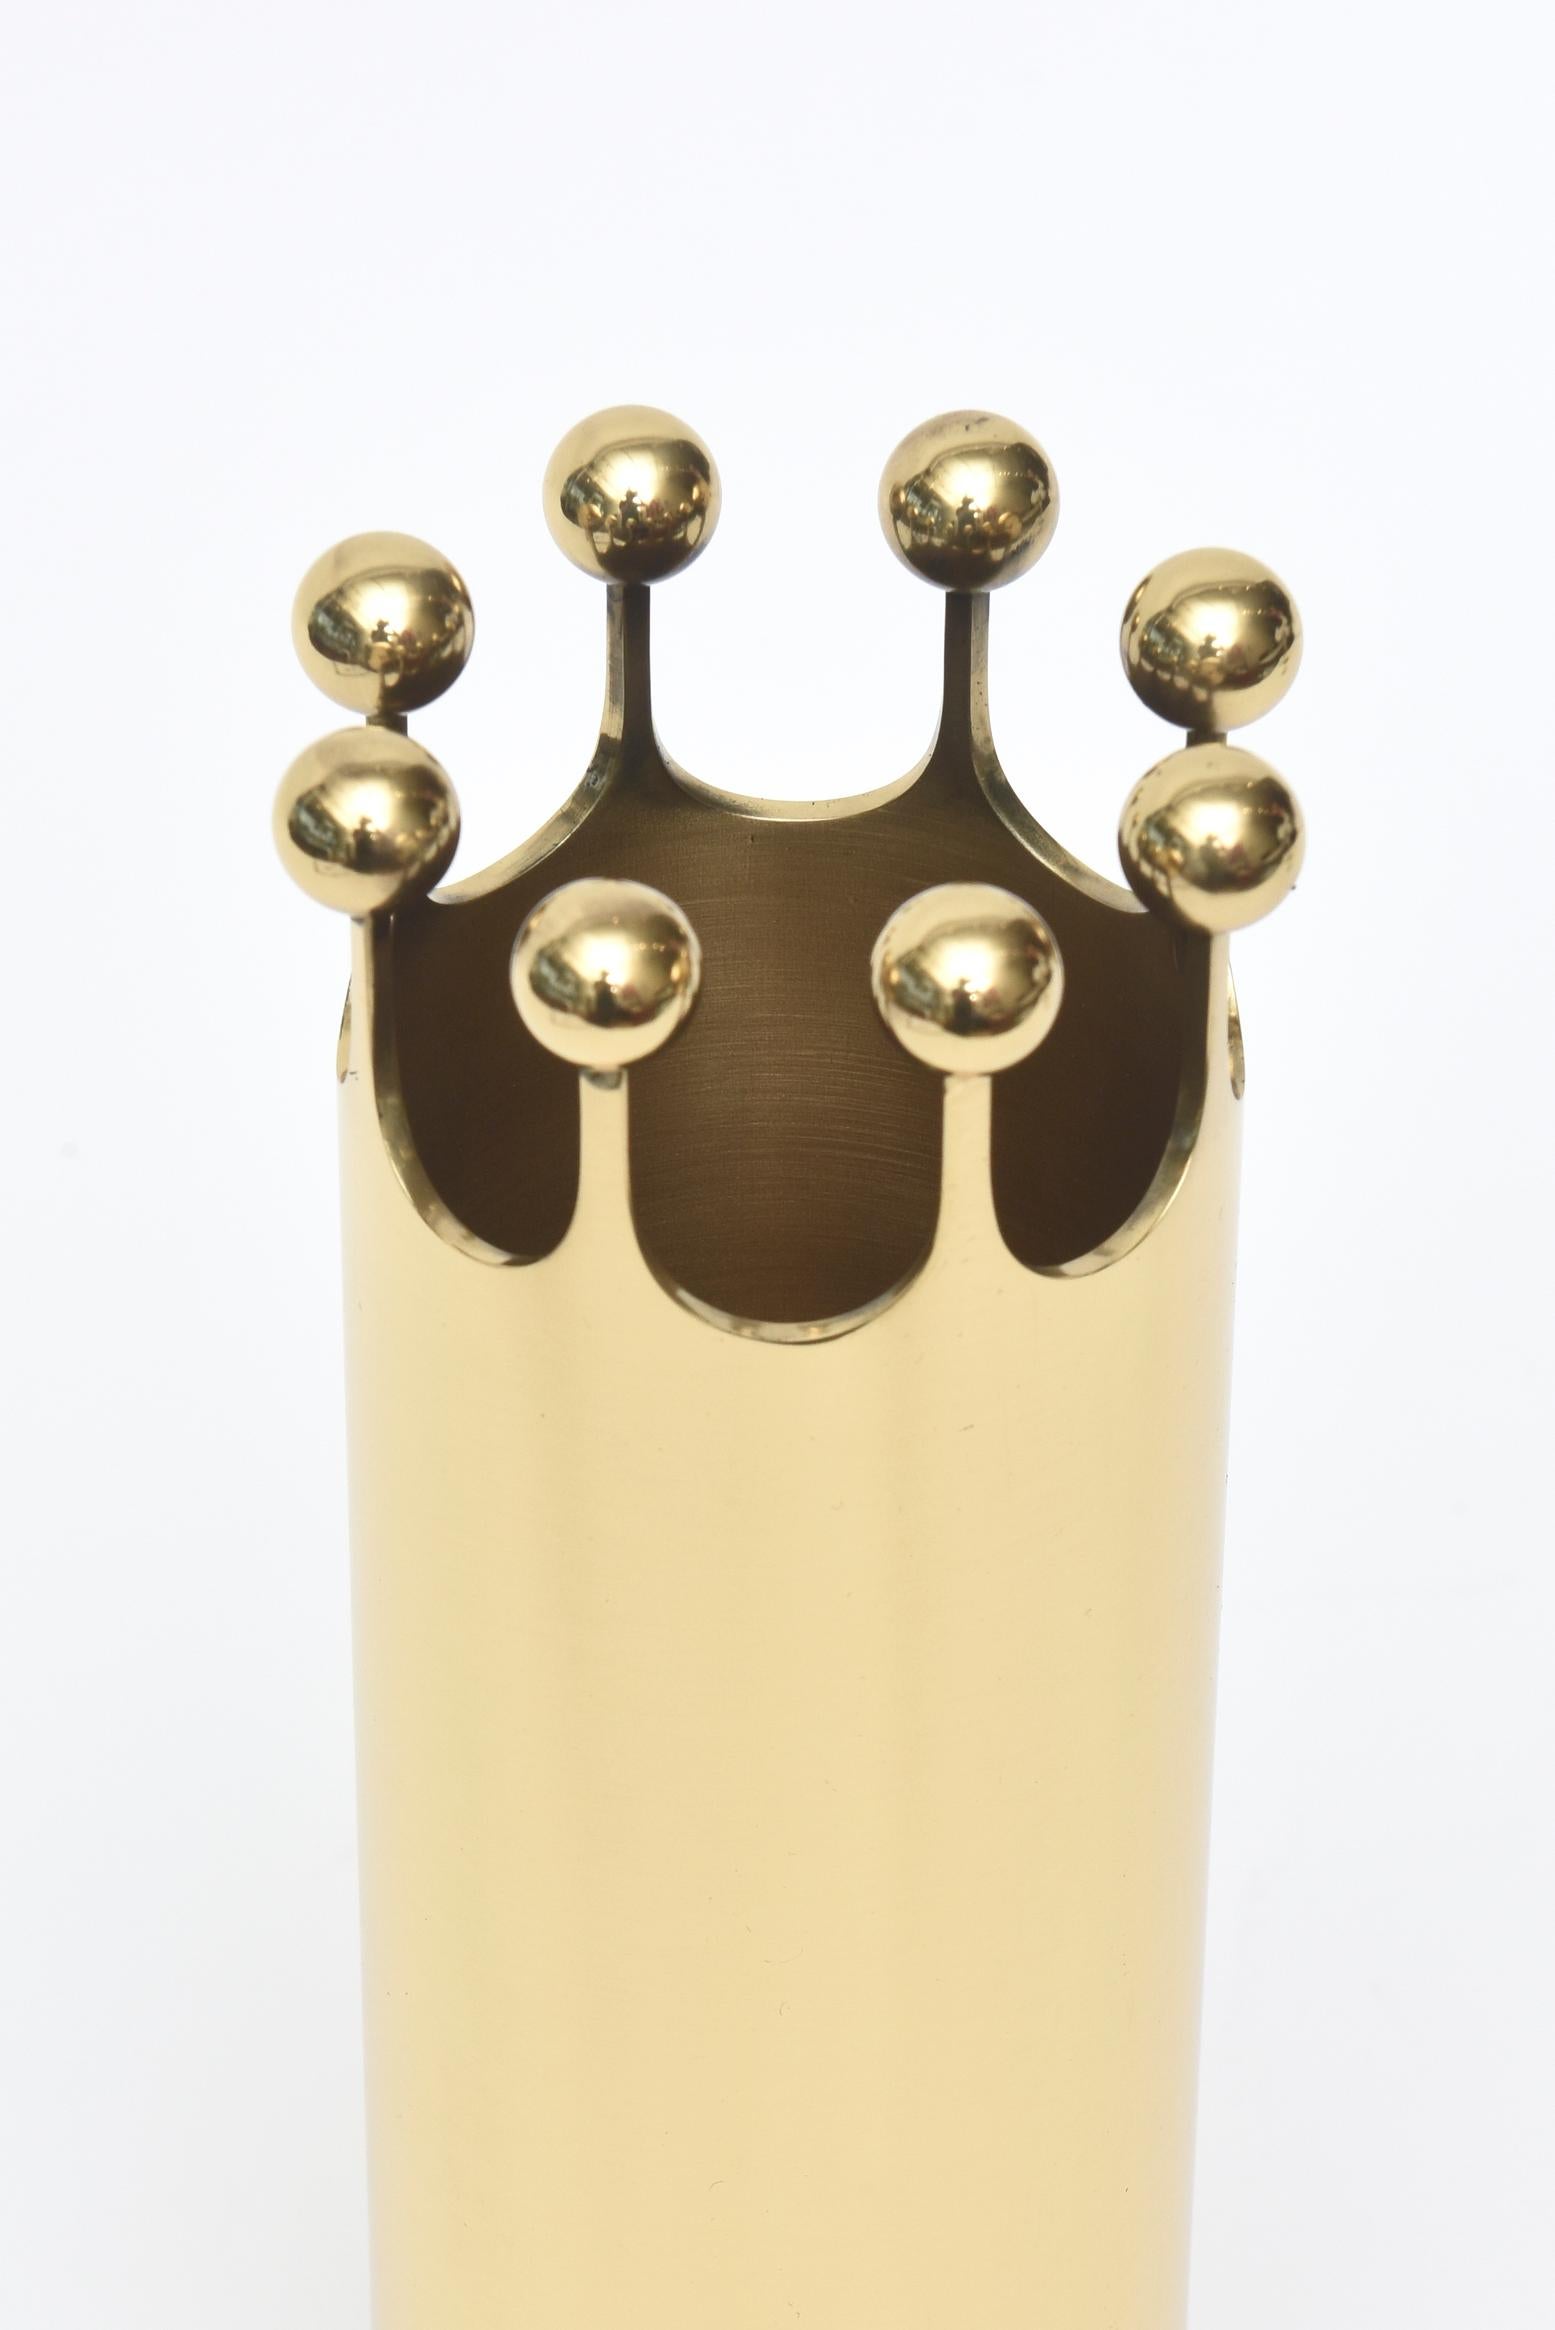 This rare cylinder solid brass vase designed by Pierre Forsell for Skultuna Sweden has a crown motif. It has been professionally polished and then lacquered so it will not tarnish. You must now only use a cotton cloth to clean it. No polish or harsh